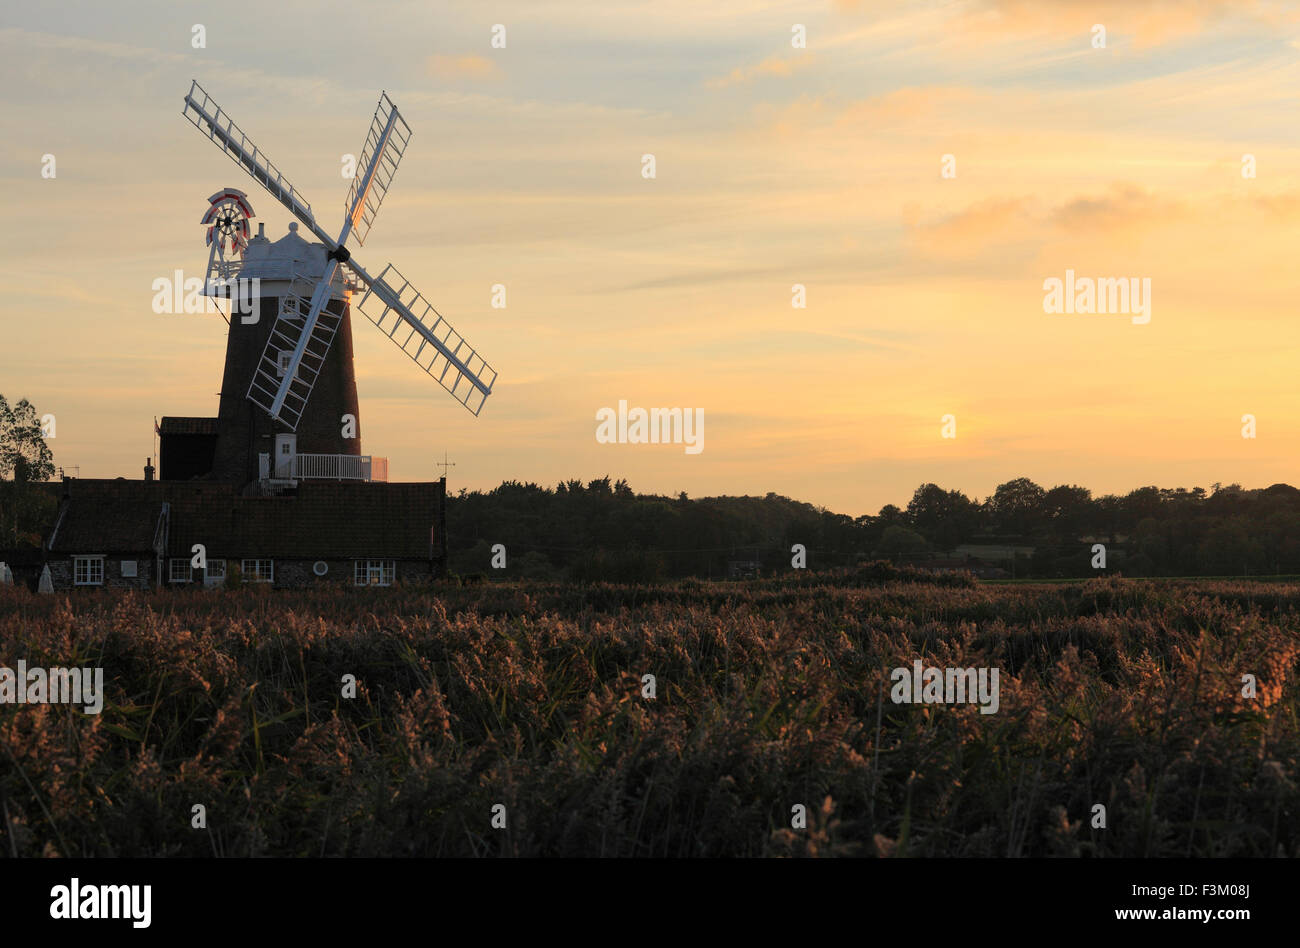 Cley Windmill at Cley next the Sea on the North Norfolk coast. Stock Photo